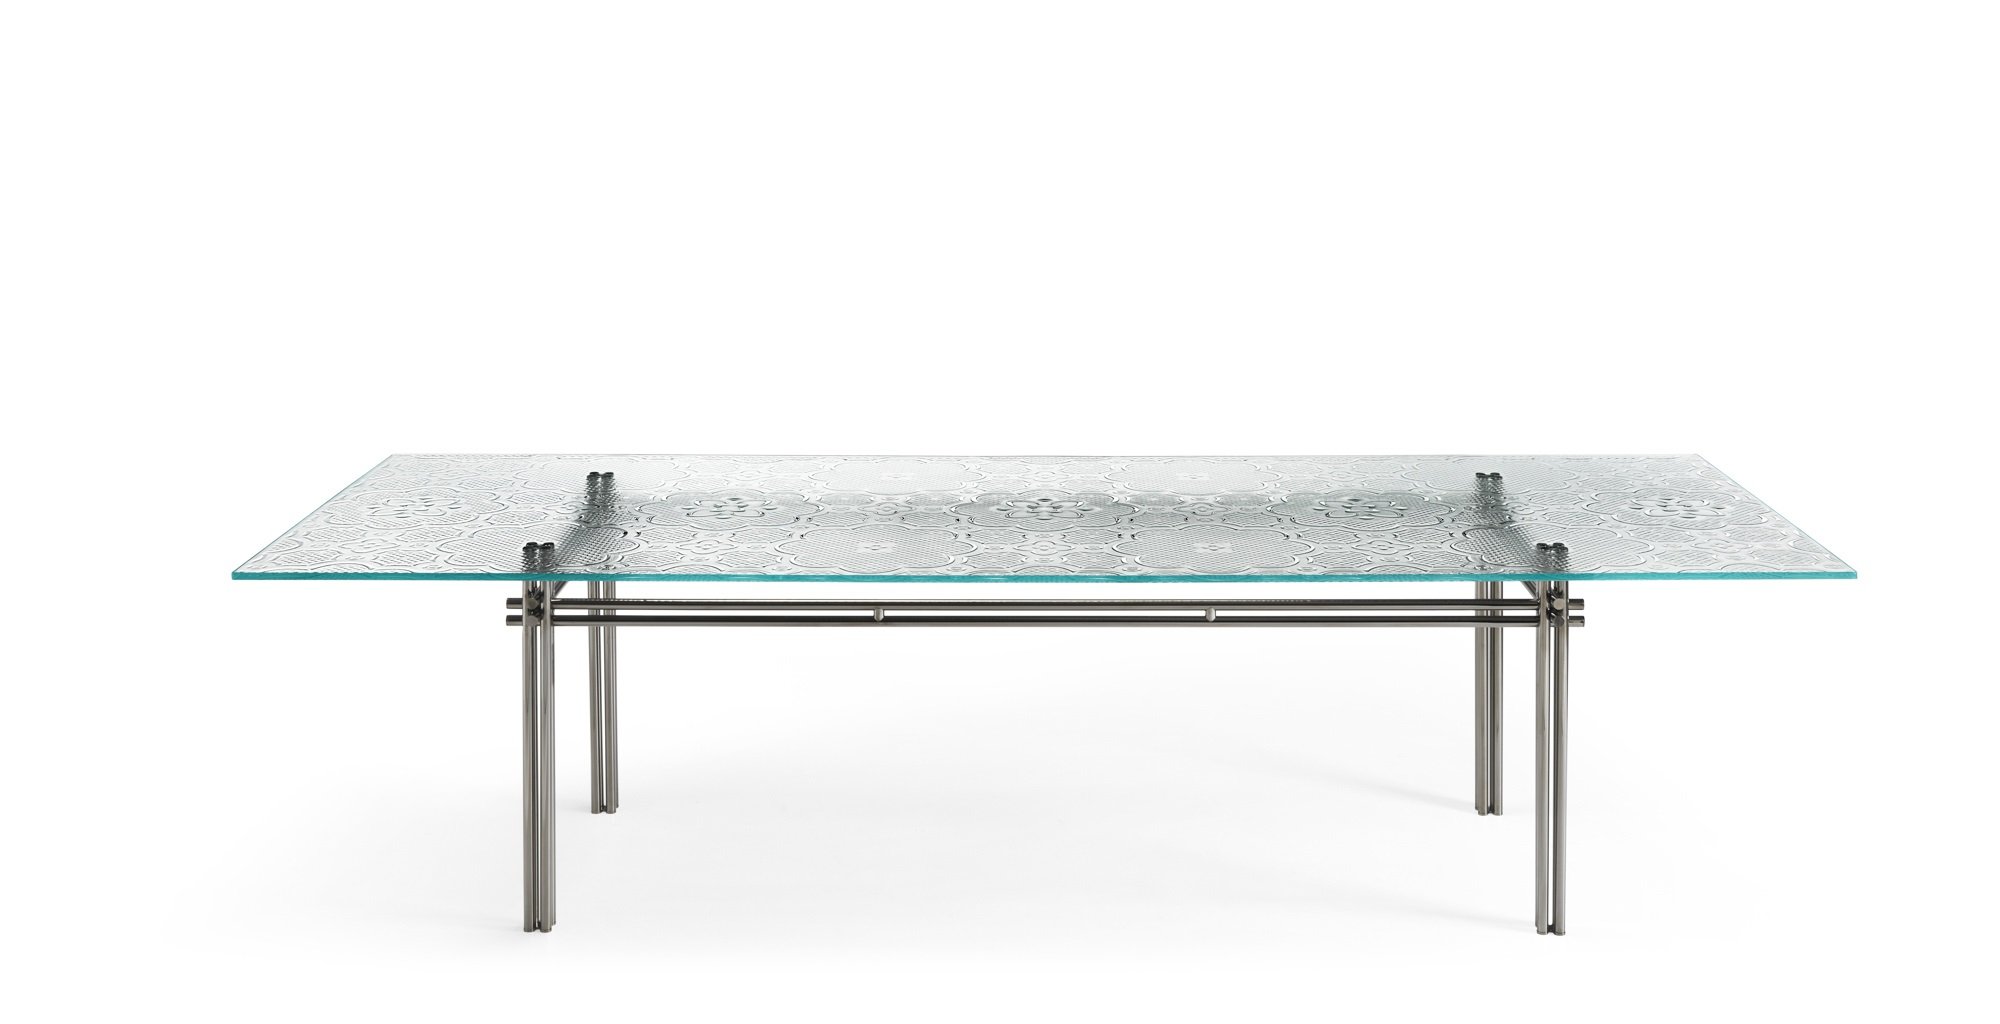 Cristaline Dining Table from Fiam, designed by Marcel Wanders